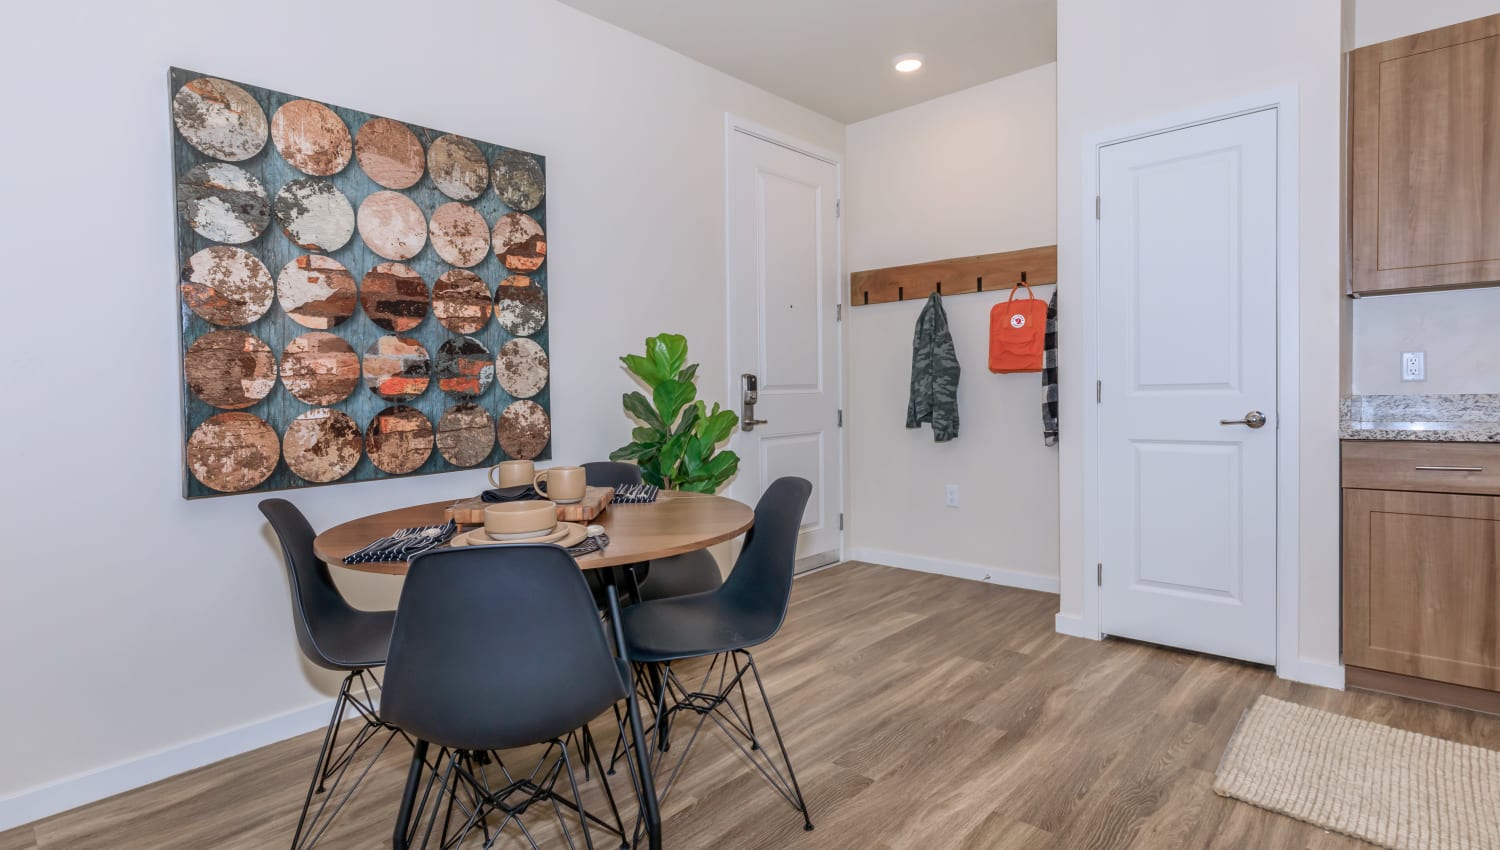 Dining nook at Trailside Apartments in Flagstaff, Arizona